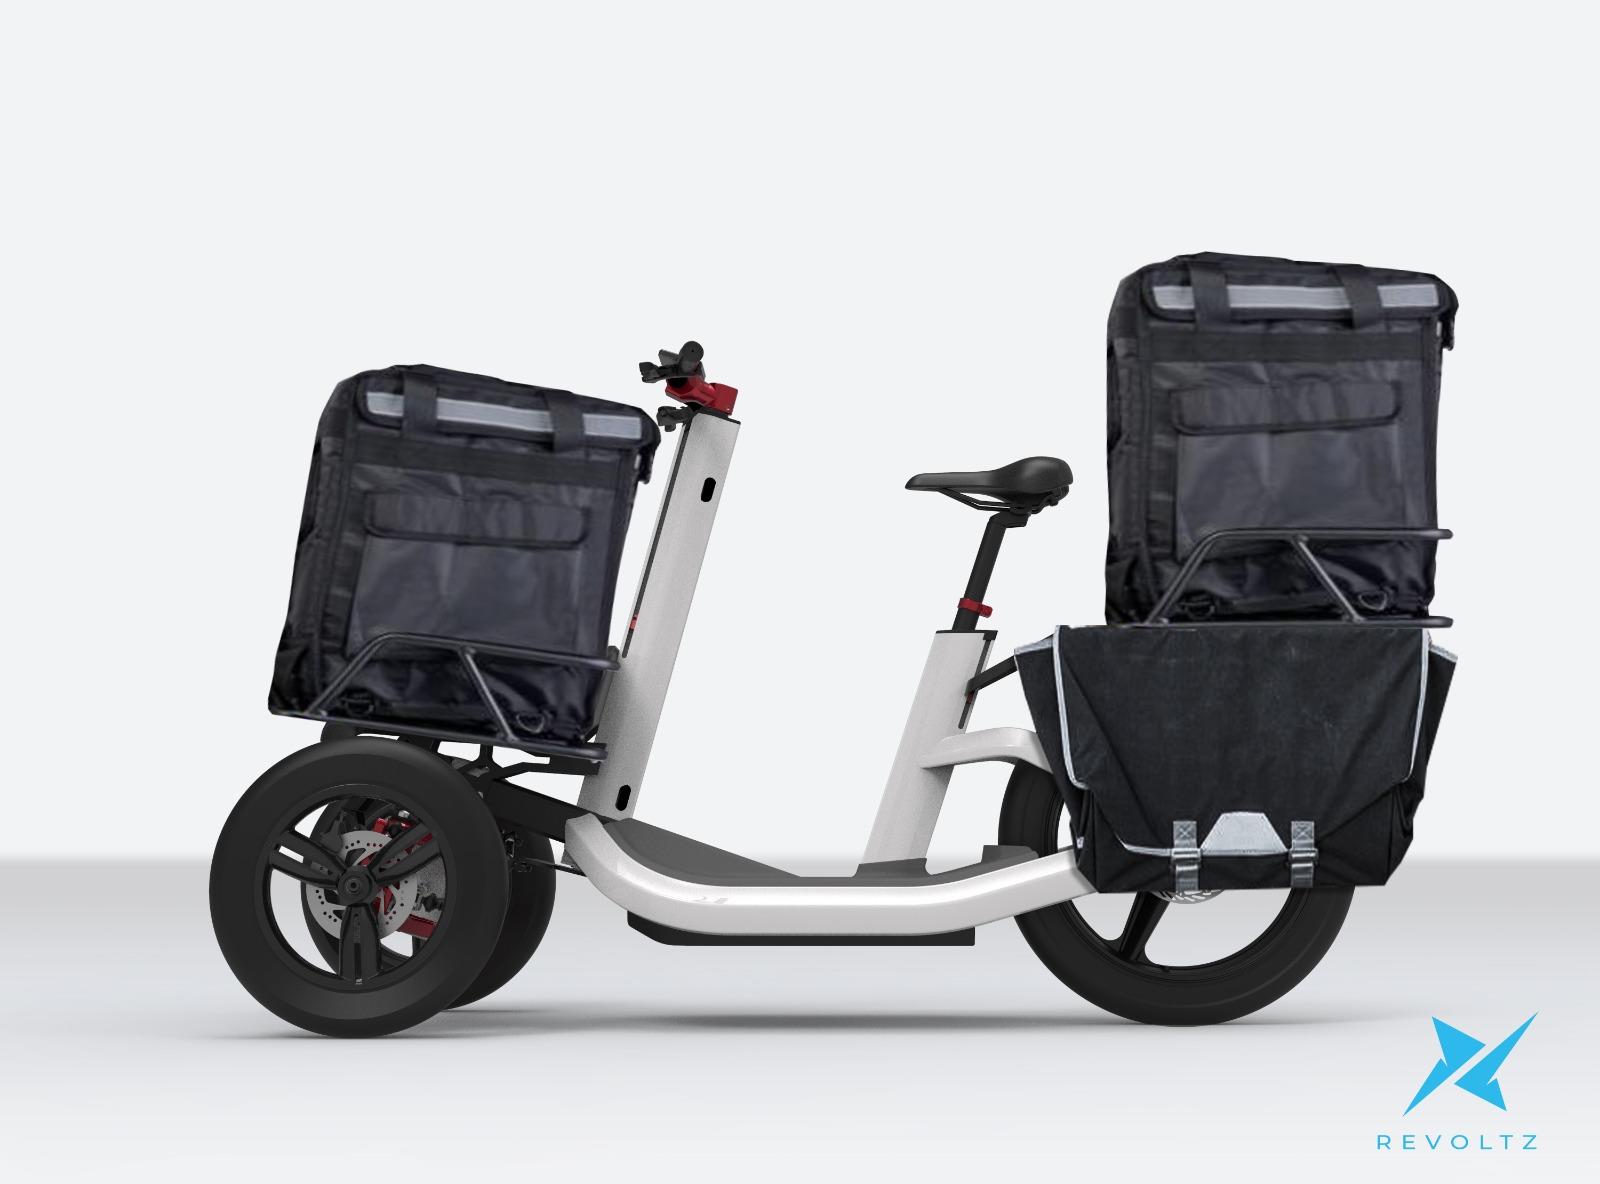 New E-mobility,Proto Electric Cargo Bike, Double Carrier Platform,Powerful Rear Motor, Long Range Distance,CE Approved  